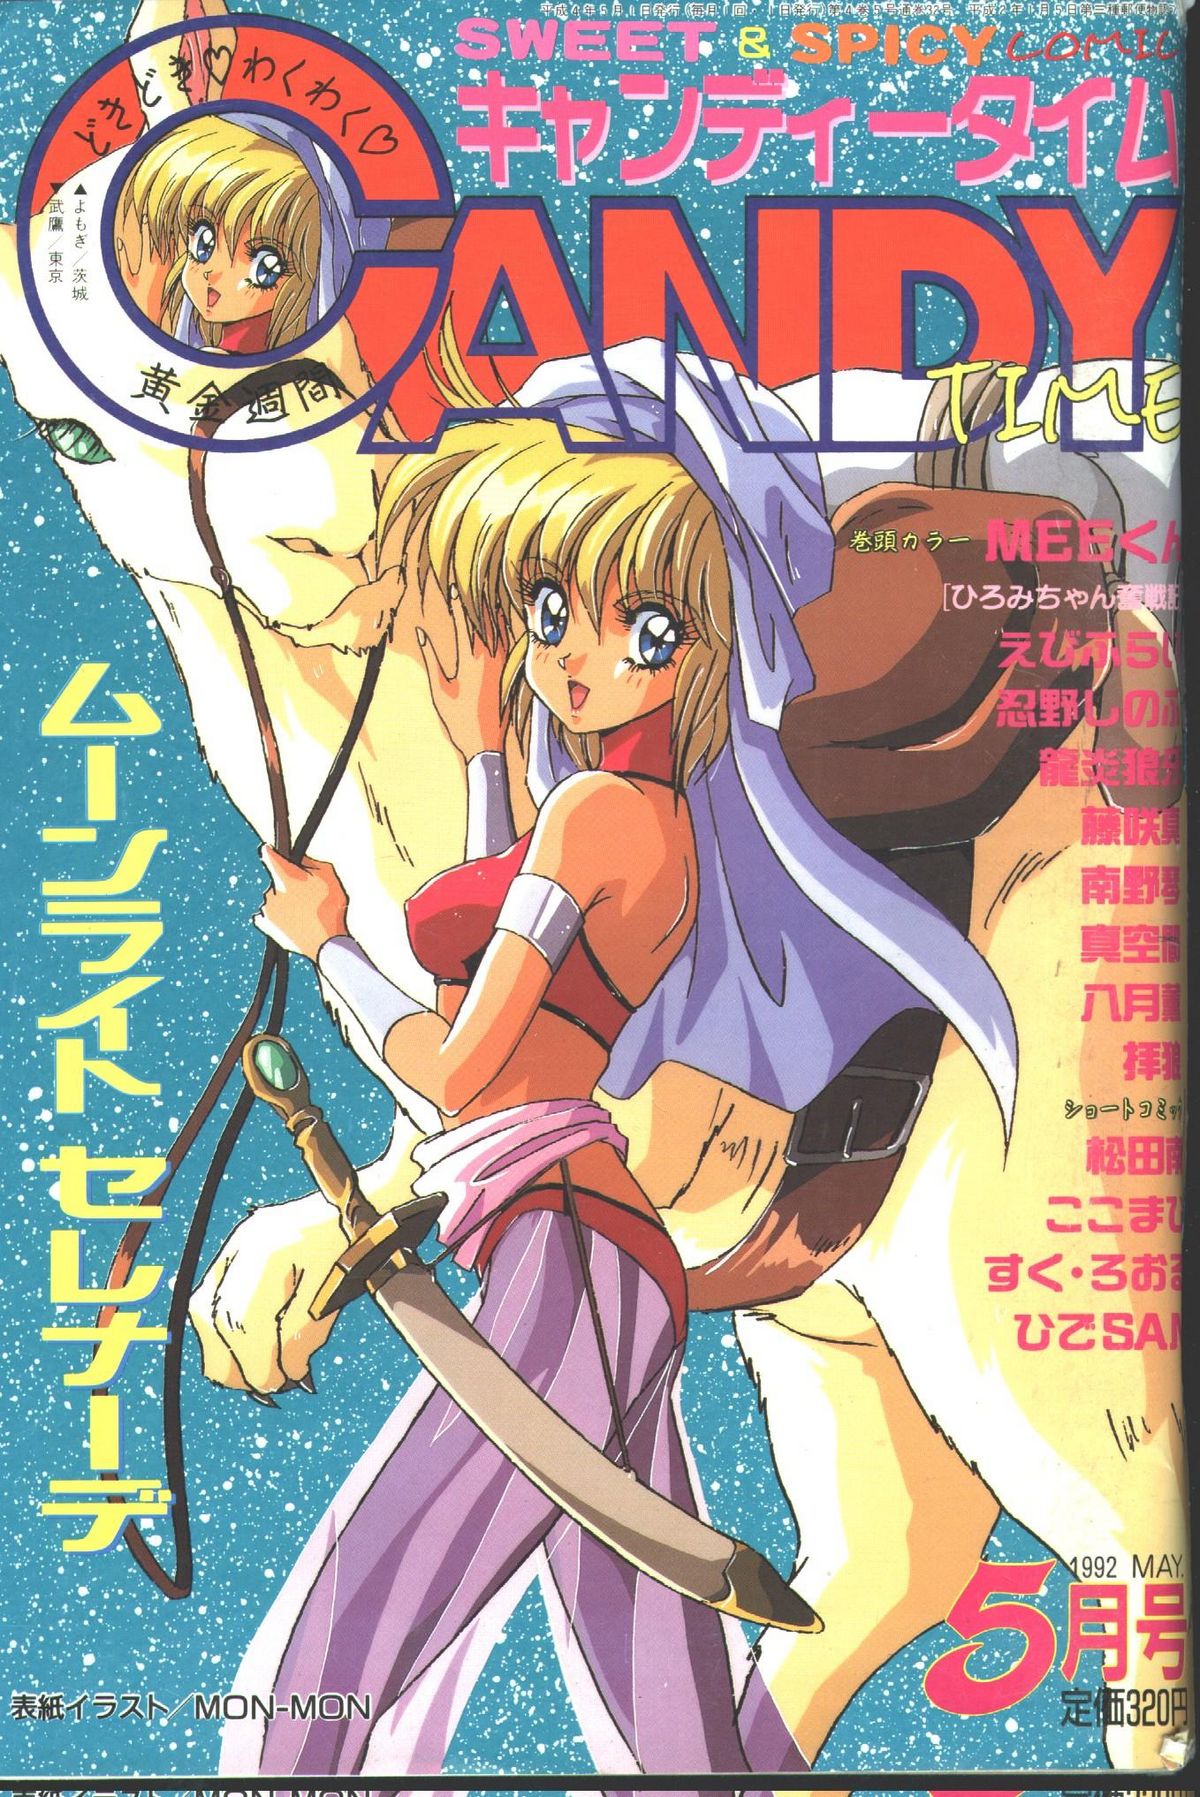 Candy Time 1992-05 [Incomplete] キャンディータイム 1992年05月号 [不完全]